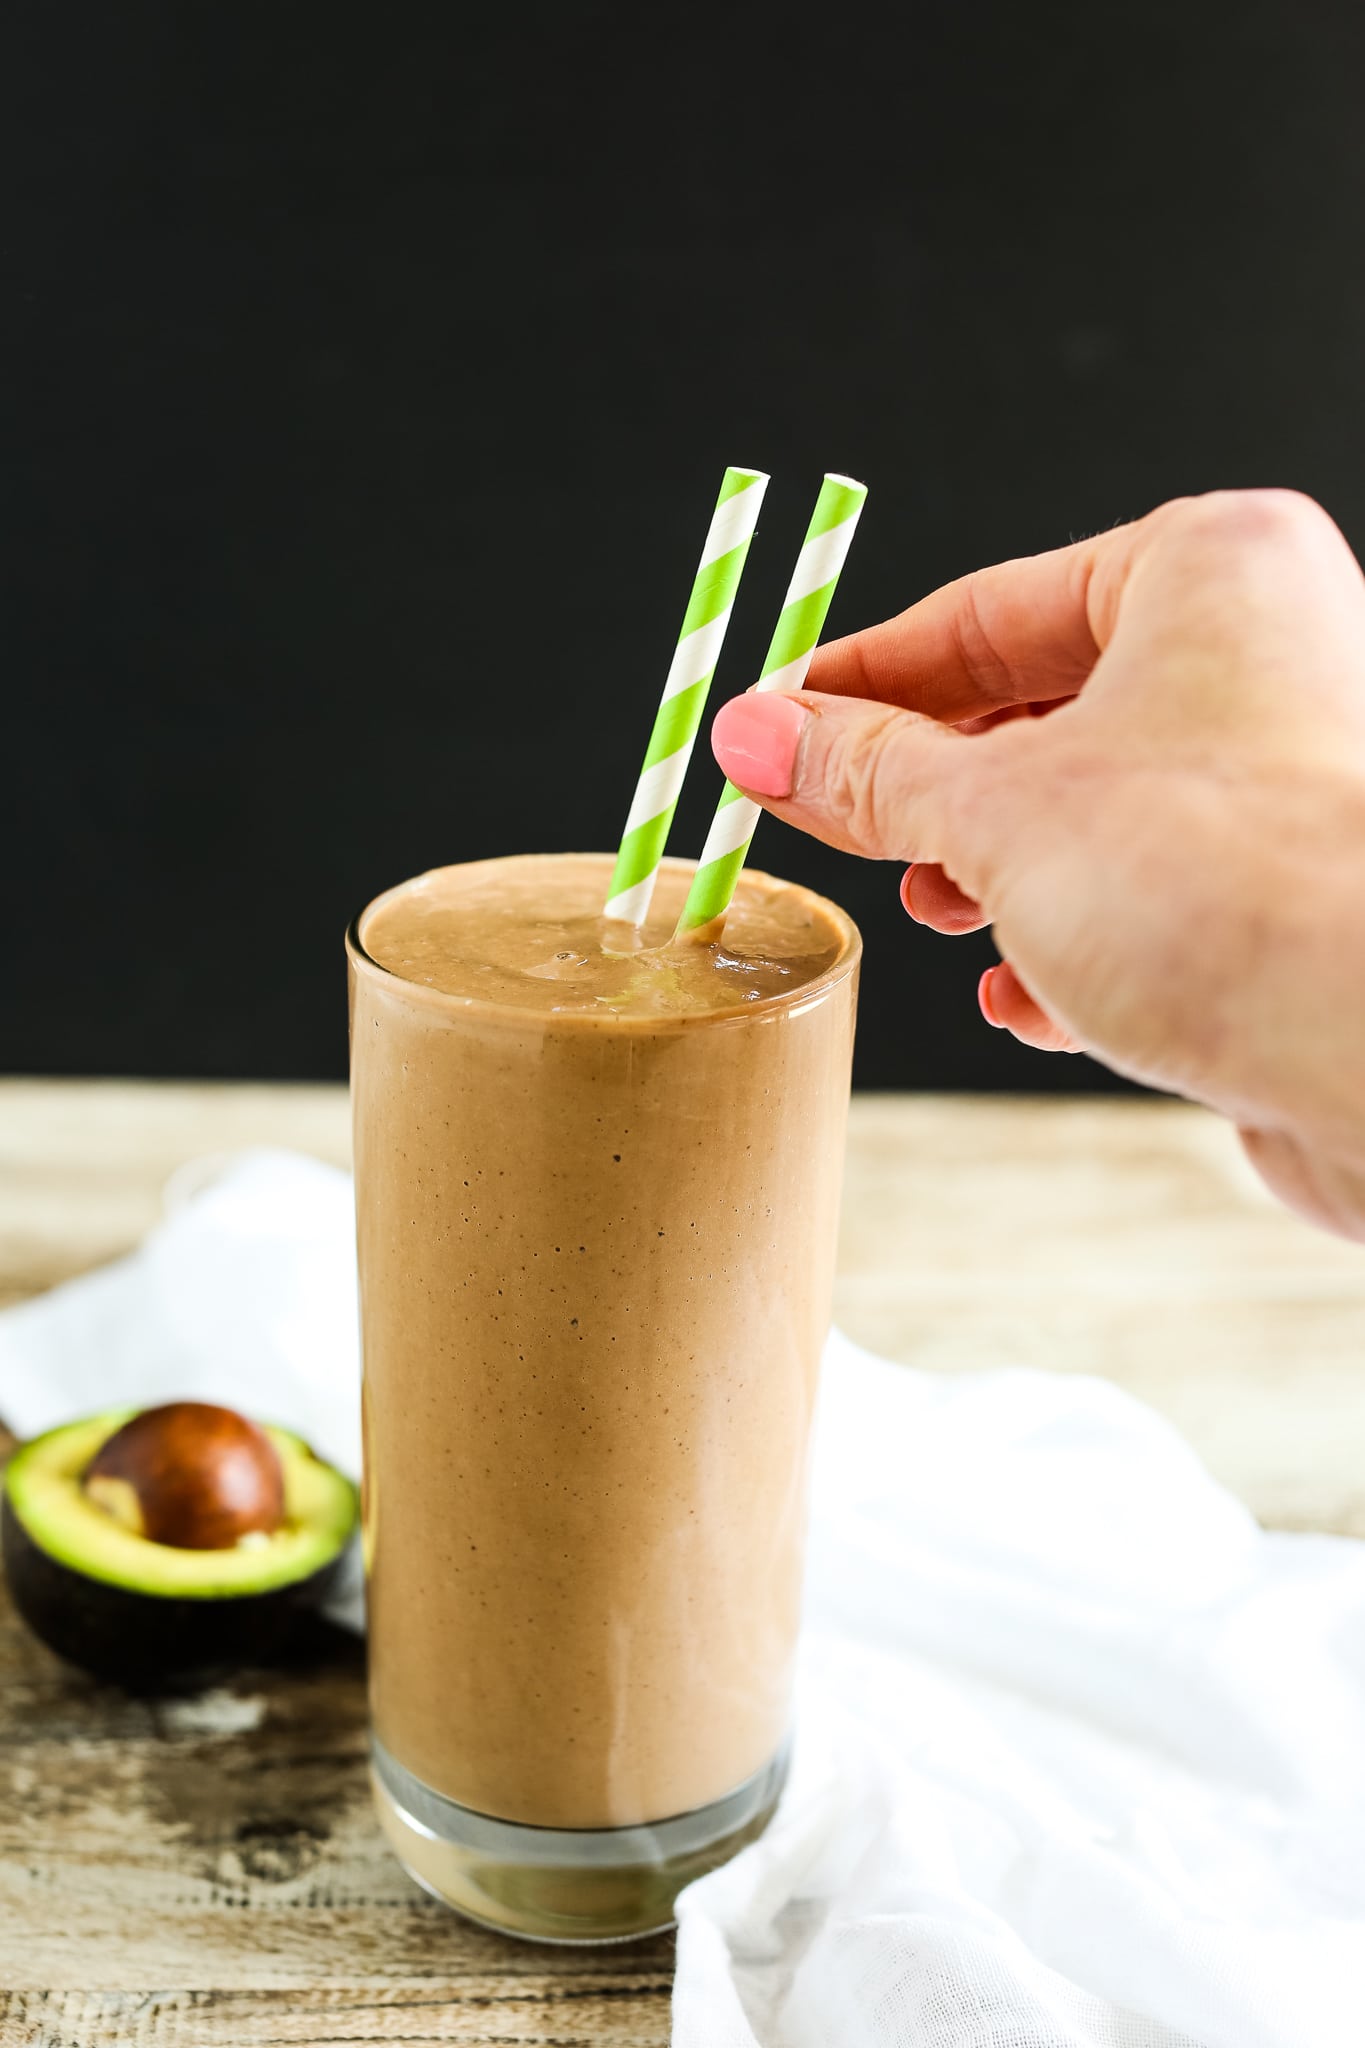 A hand grabbing a green straw that is in a tall glass with a chocolate colored smoothie